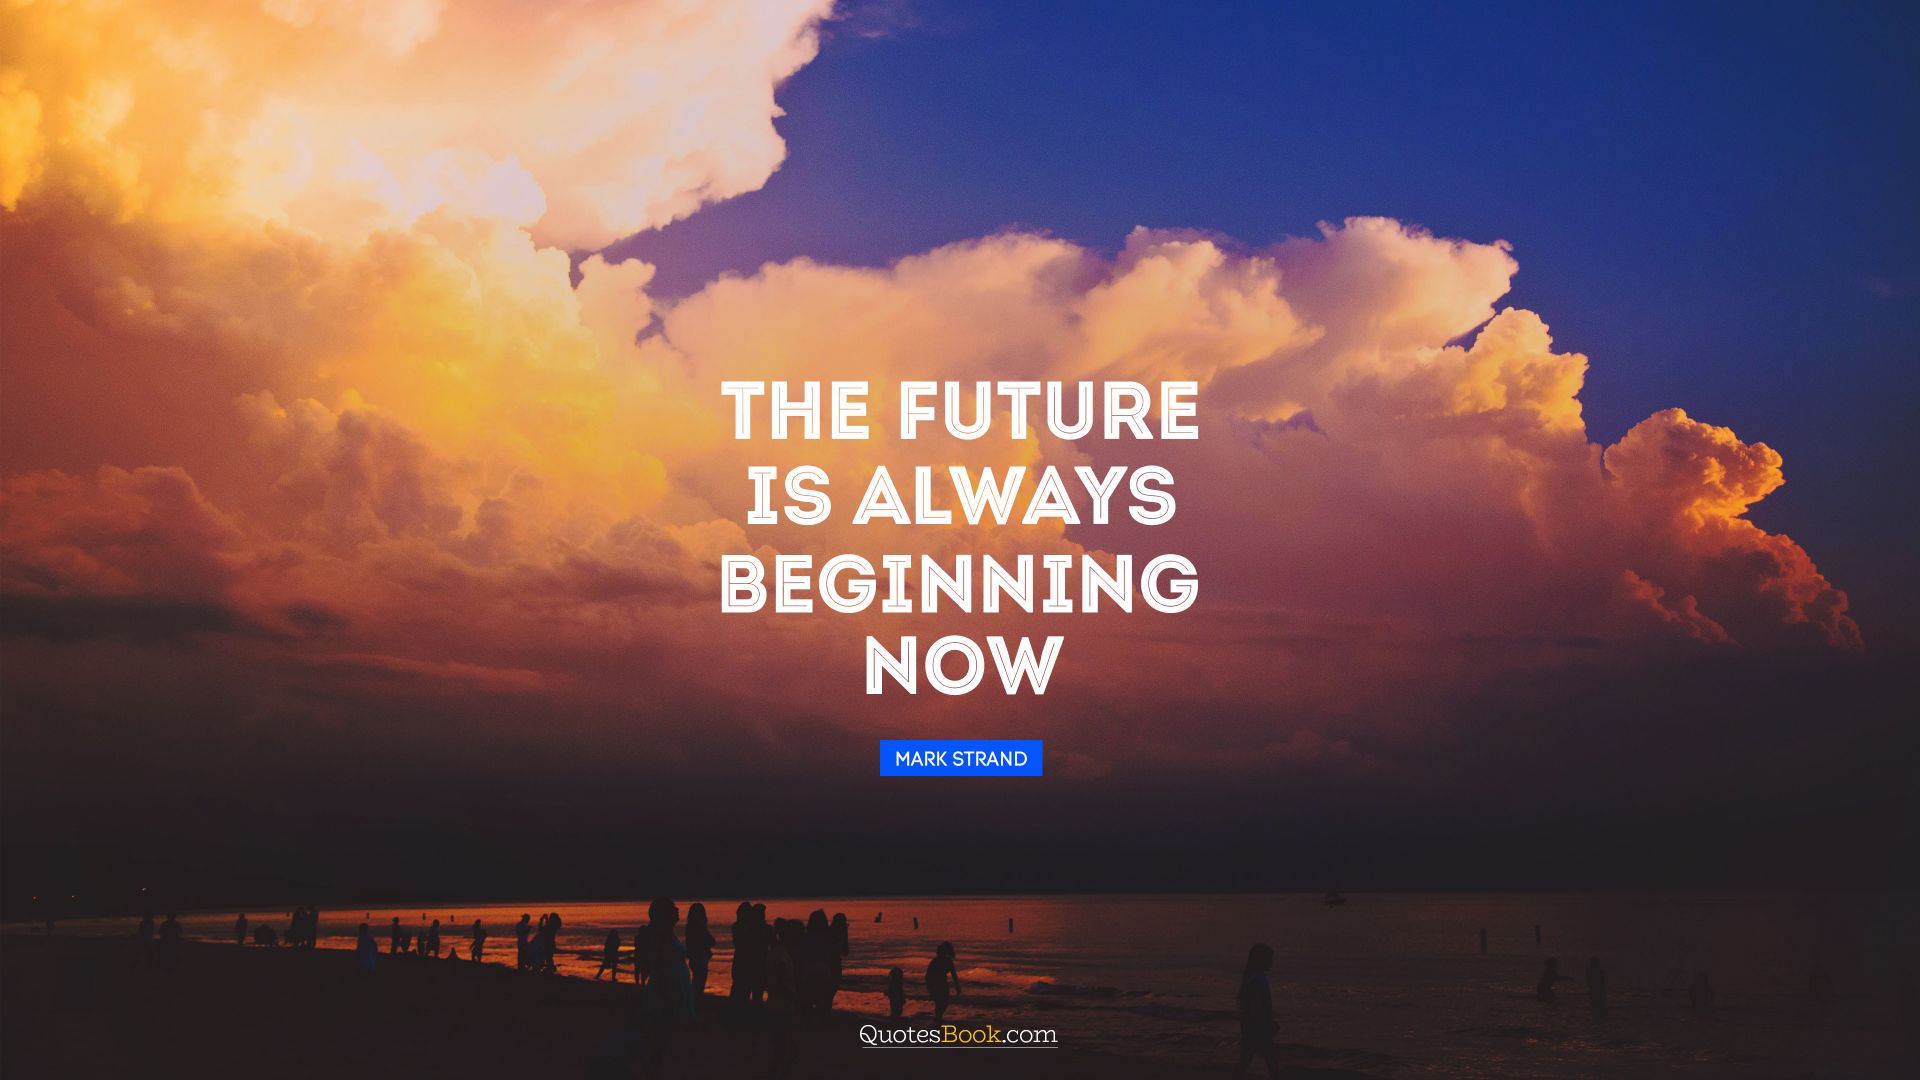 The future is always beginning now. - Quote by Mark Strand